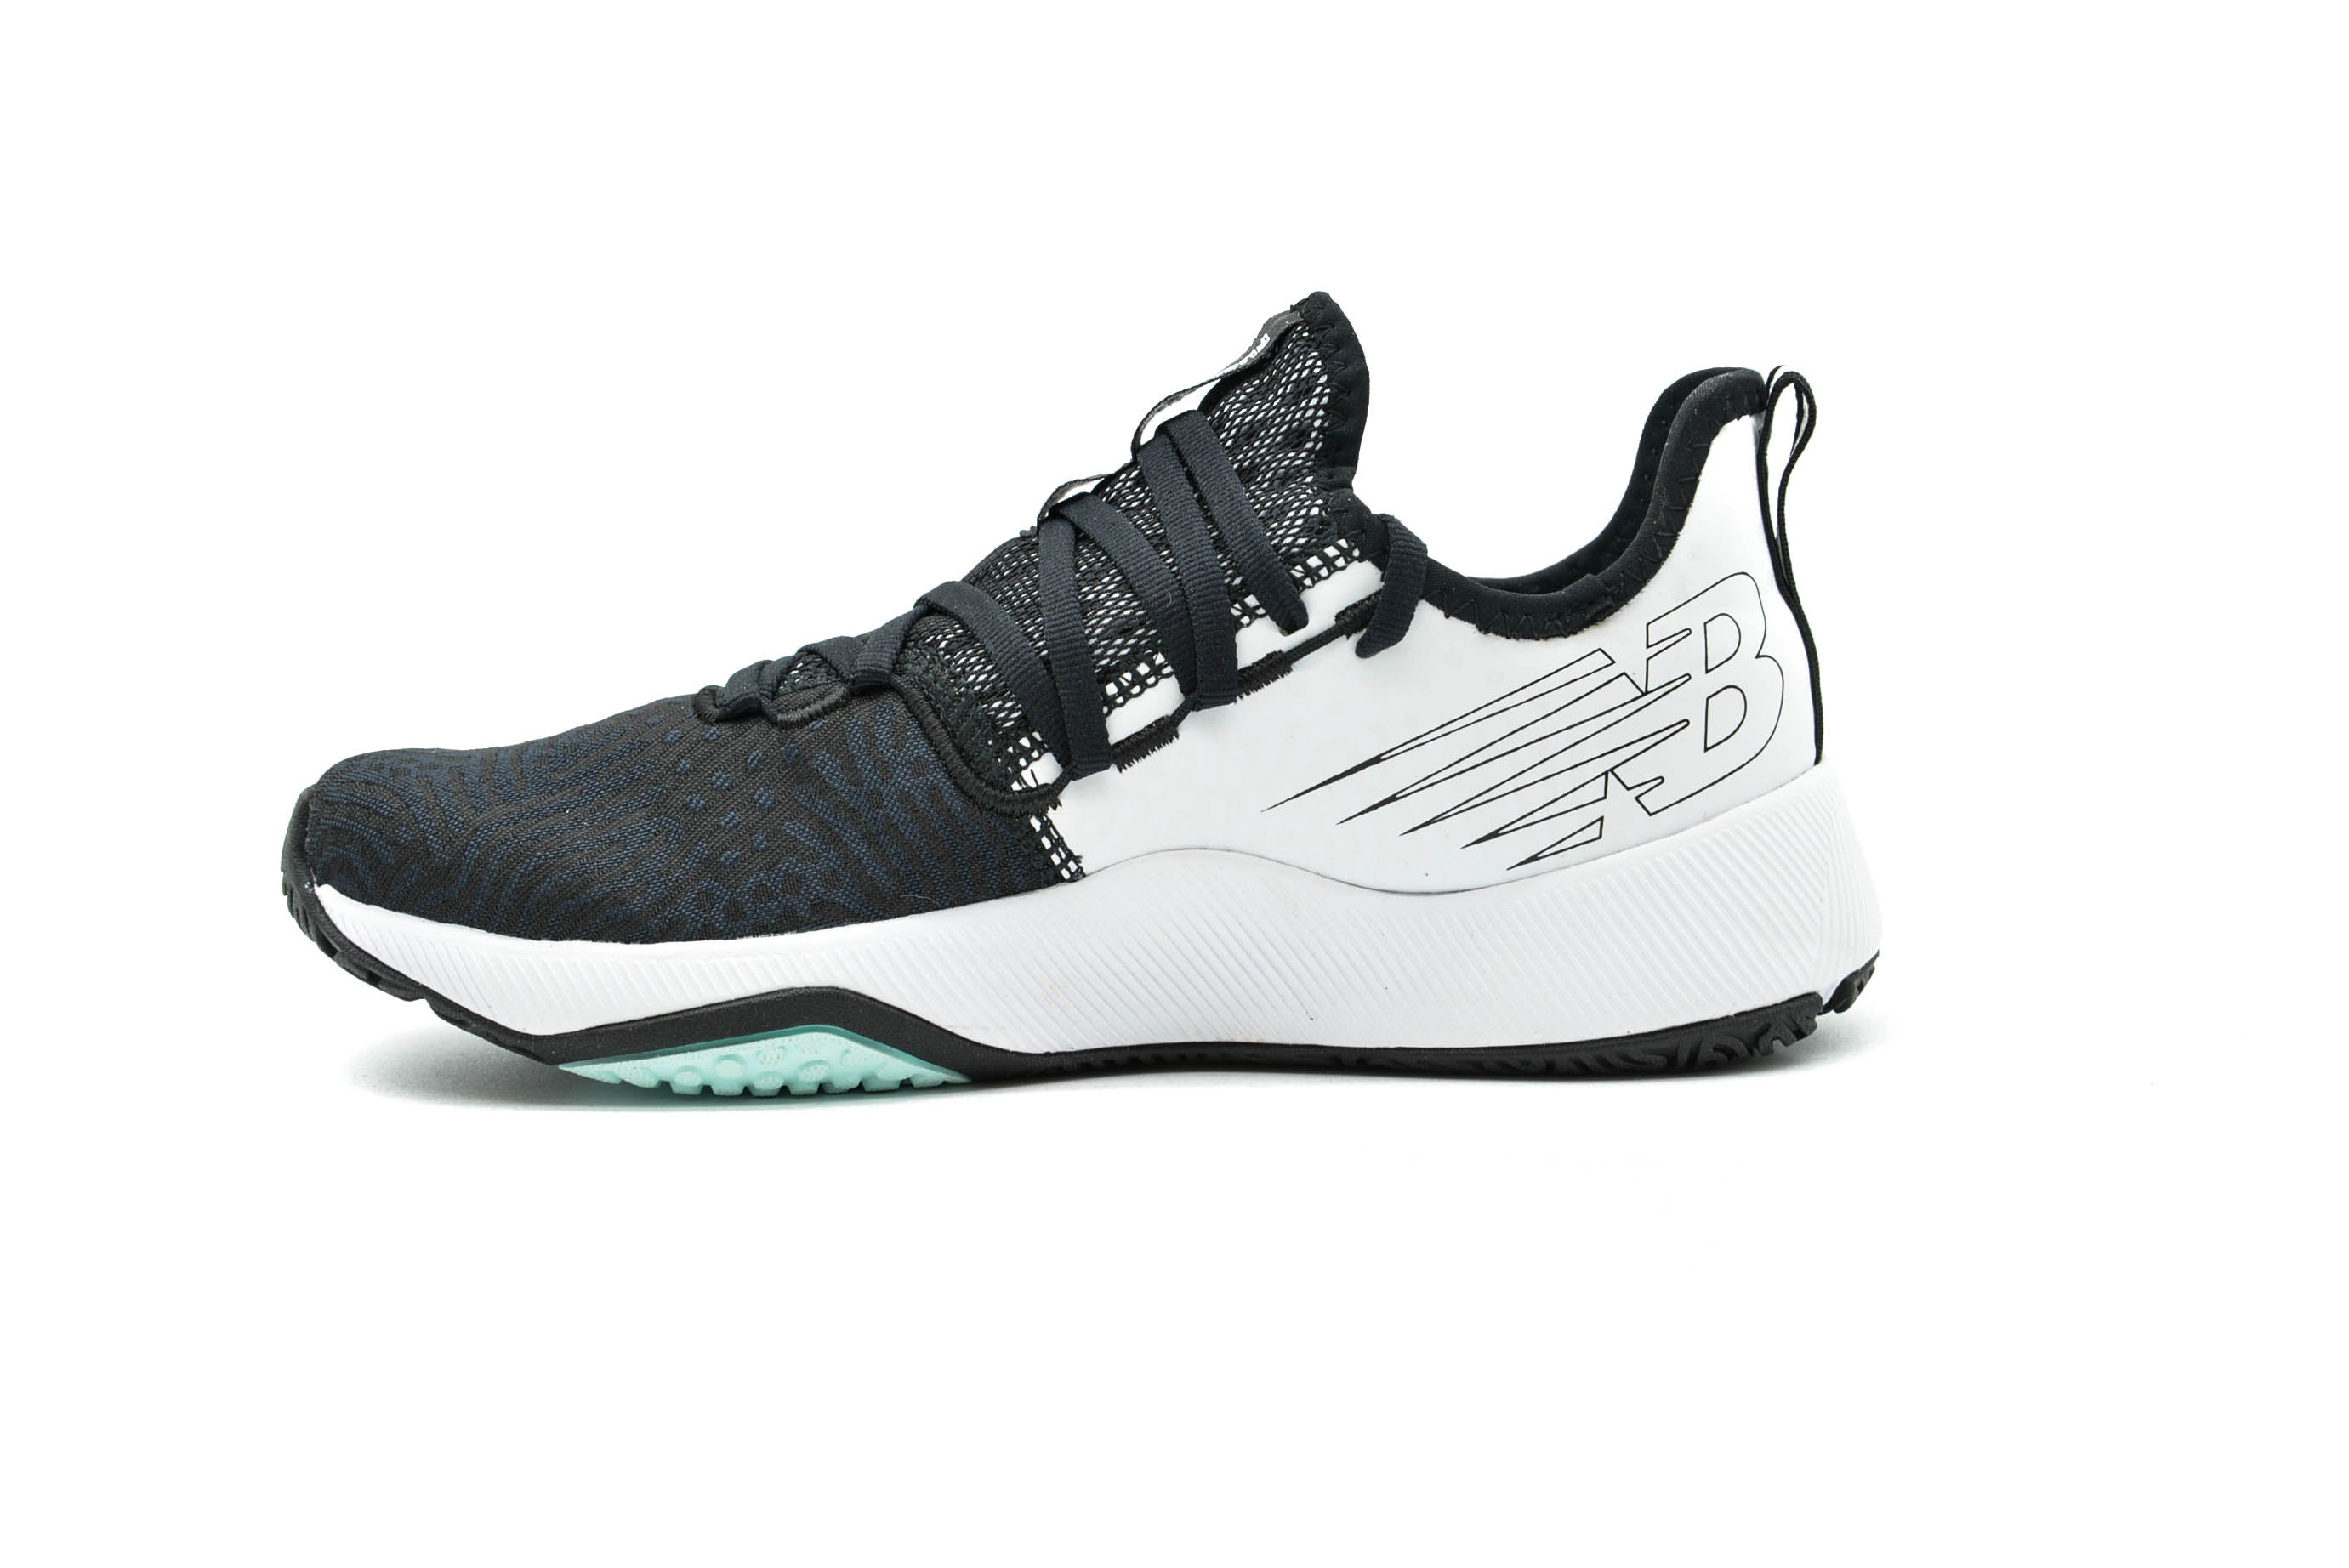 NEW BALANCE FuelCell 100